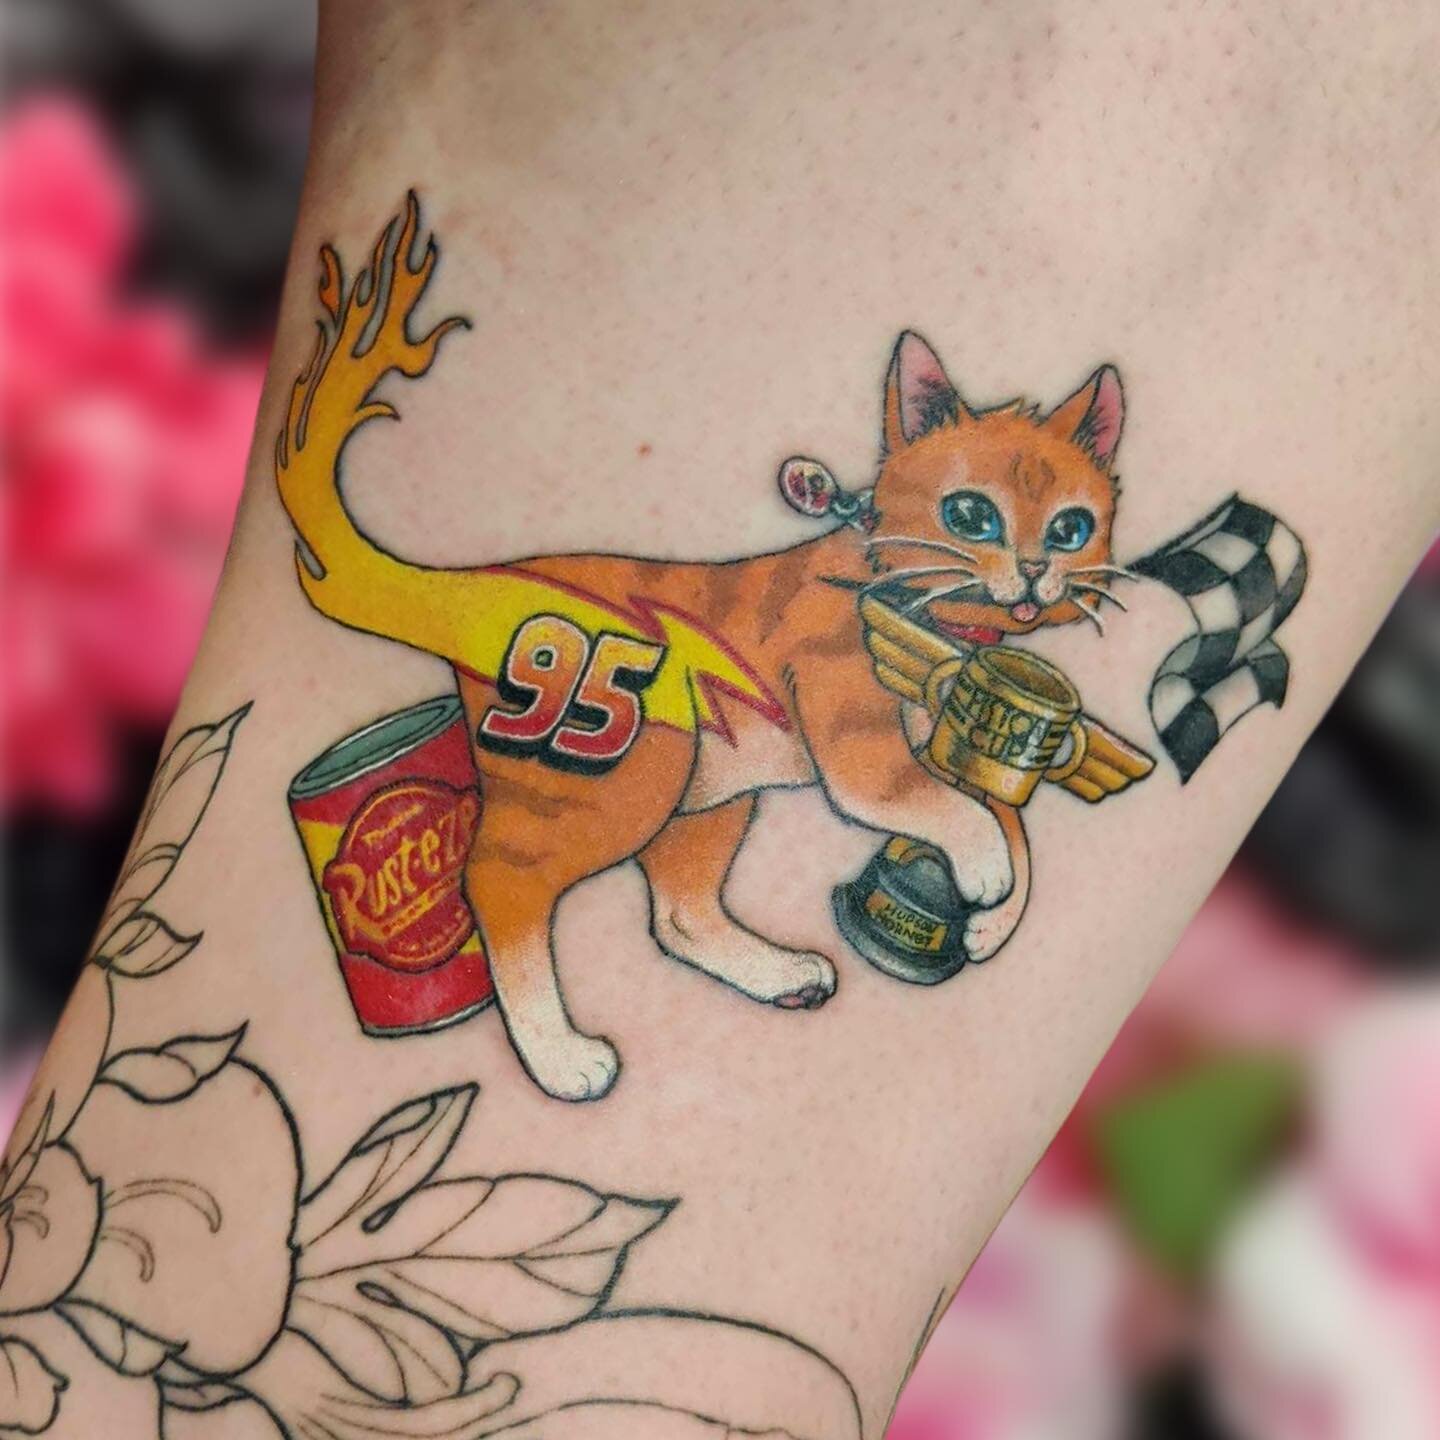 ⚡️ K A - C H M E O W 🐾 
Tattooed this on myself cause why not! I love cats. I love lightning McQueen. Combine the two!
Now it&rsquo;s my favorite cat tattoo on my body!!

@crybabytattooproducts 
@eternalink 
@kittytattoos 

#lightningmcqueen #lightn